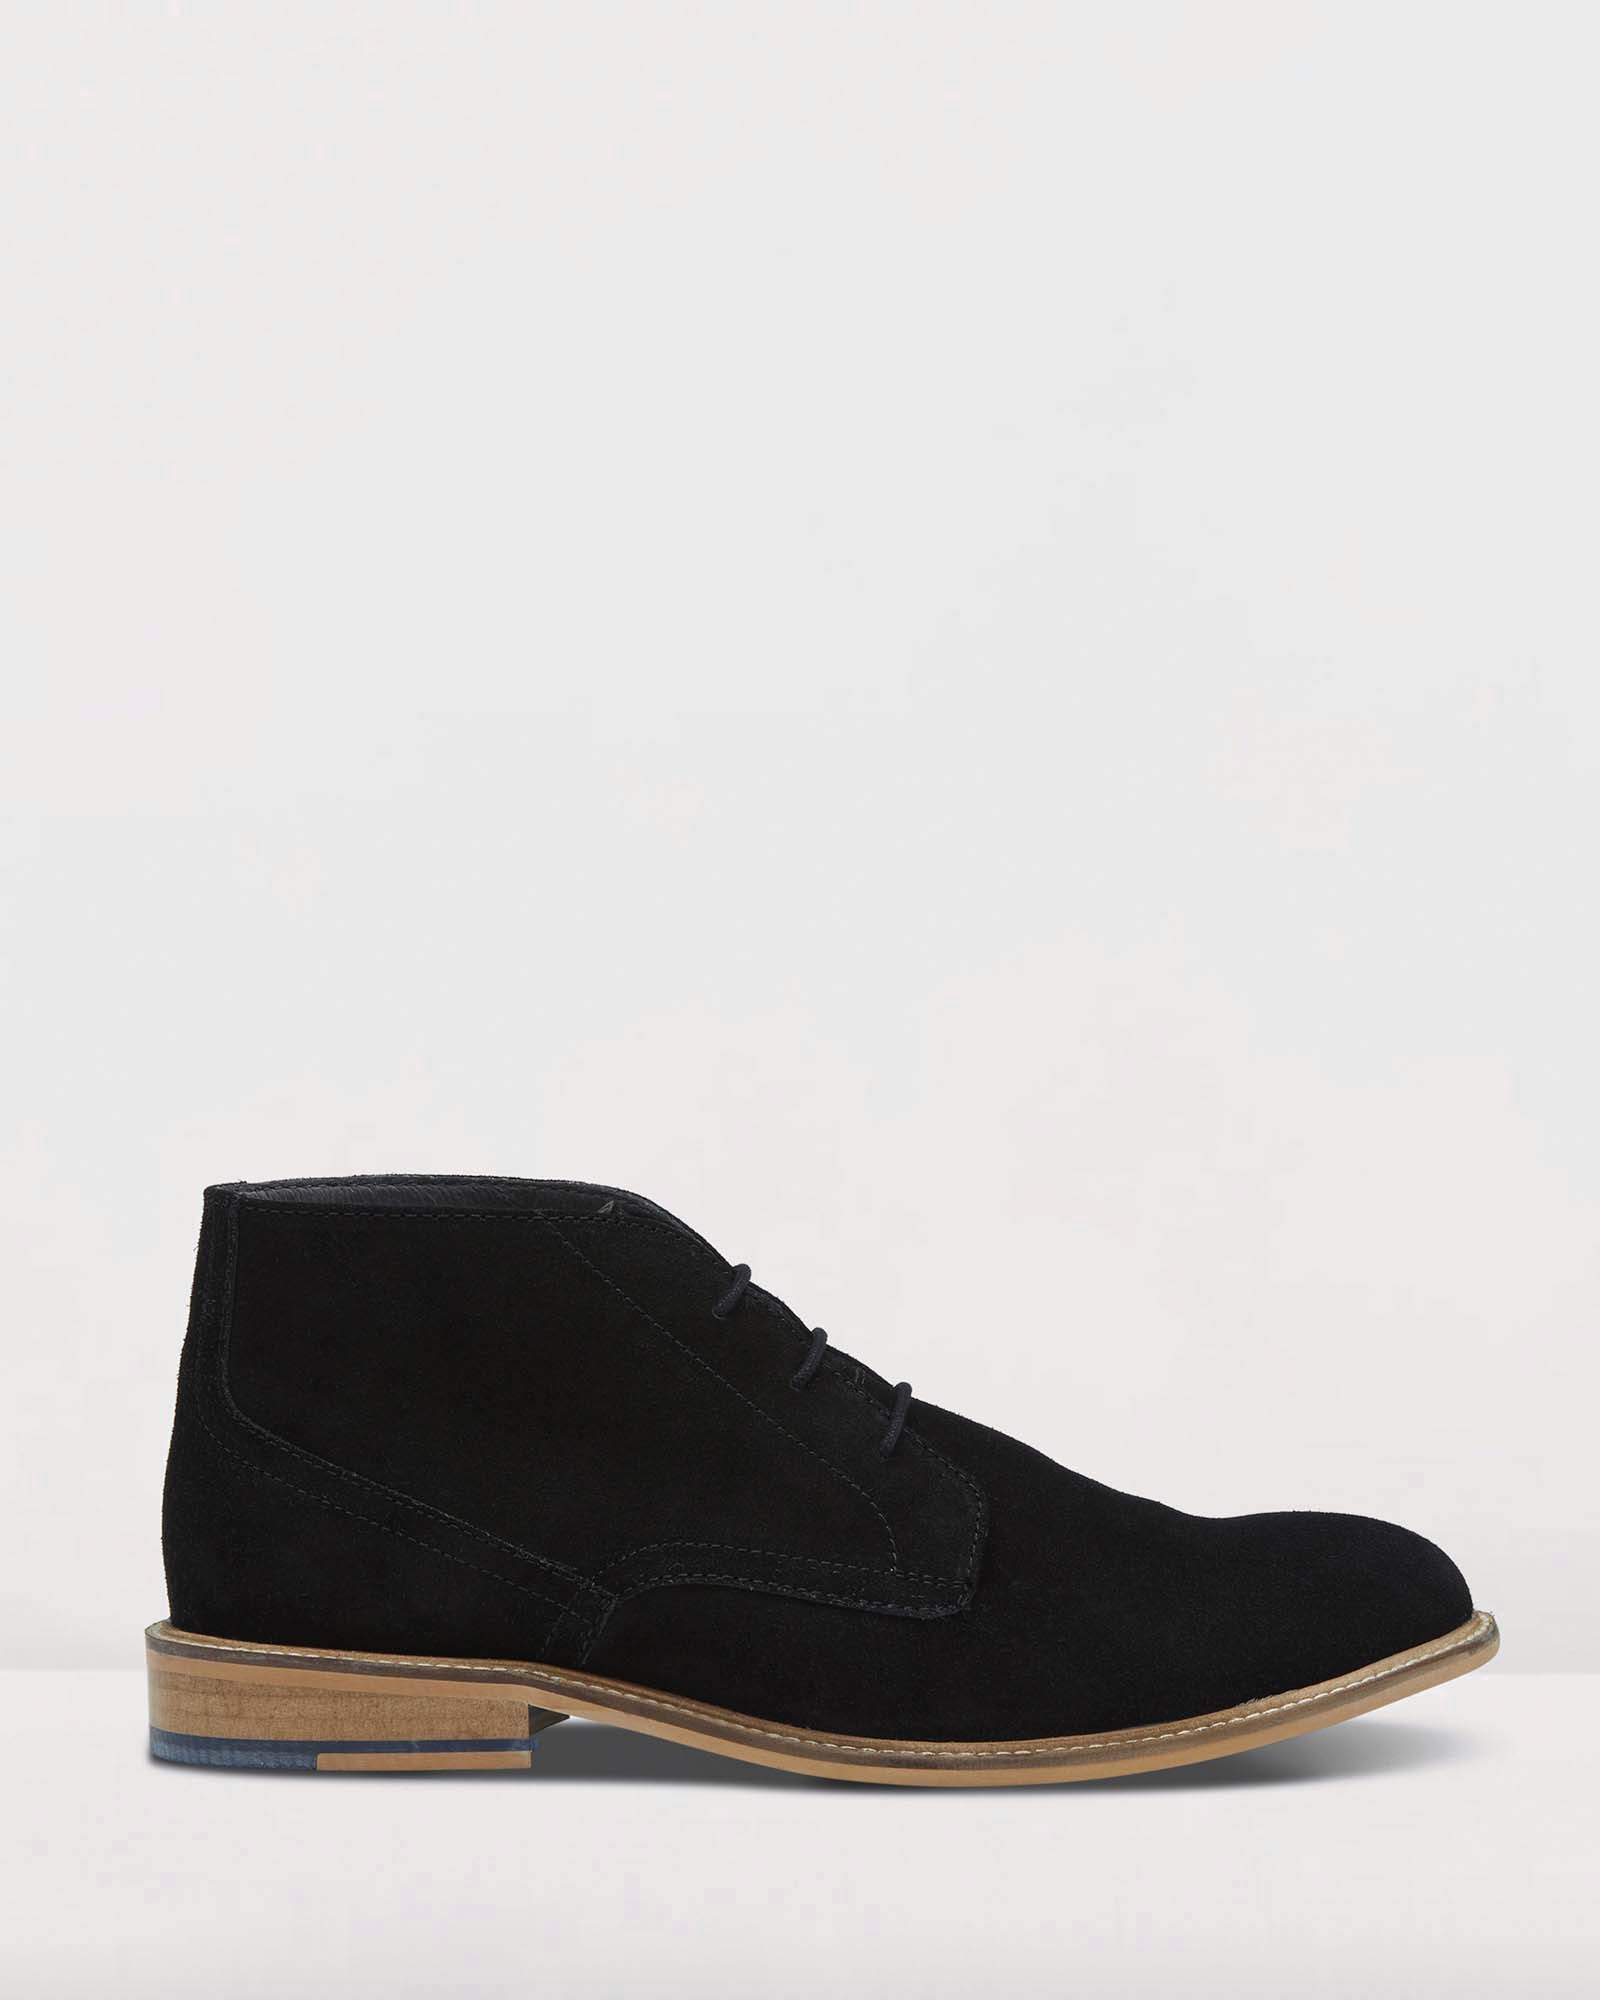 Braxton Boots Black by Oxford | ShoeSales